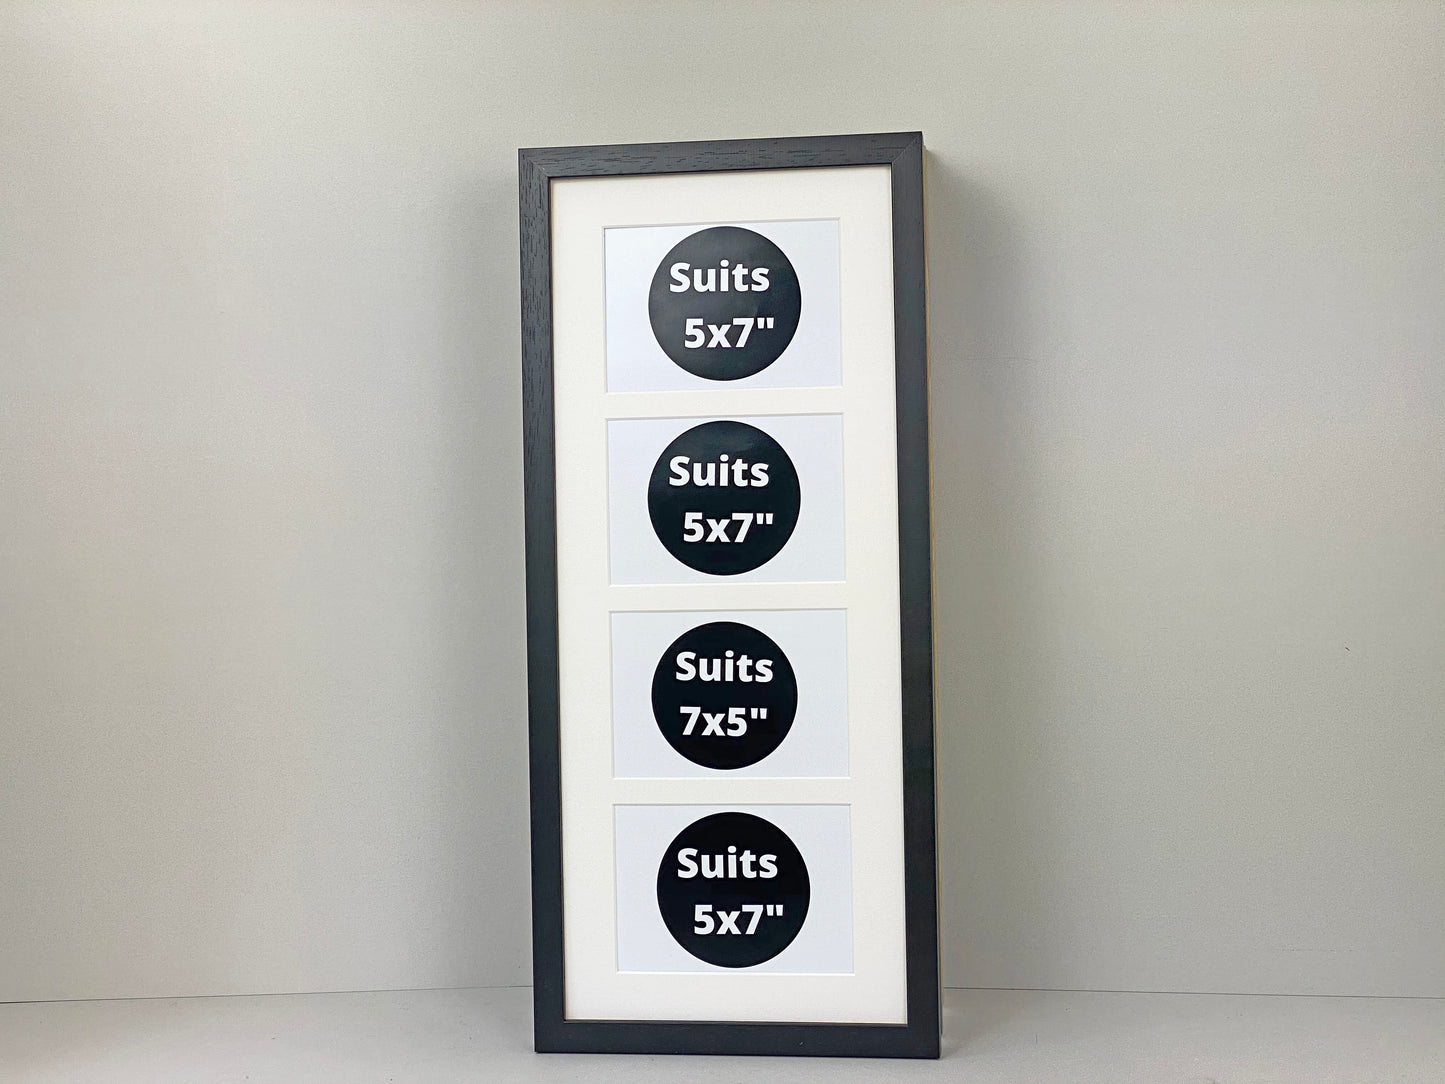 Suits Four 5x7" Photos. 25x60cm. Wooden Collage Picture Frame.